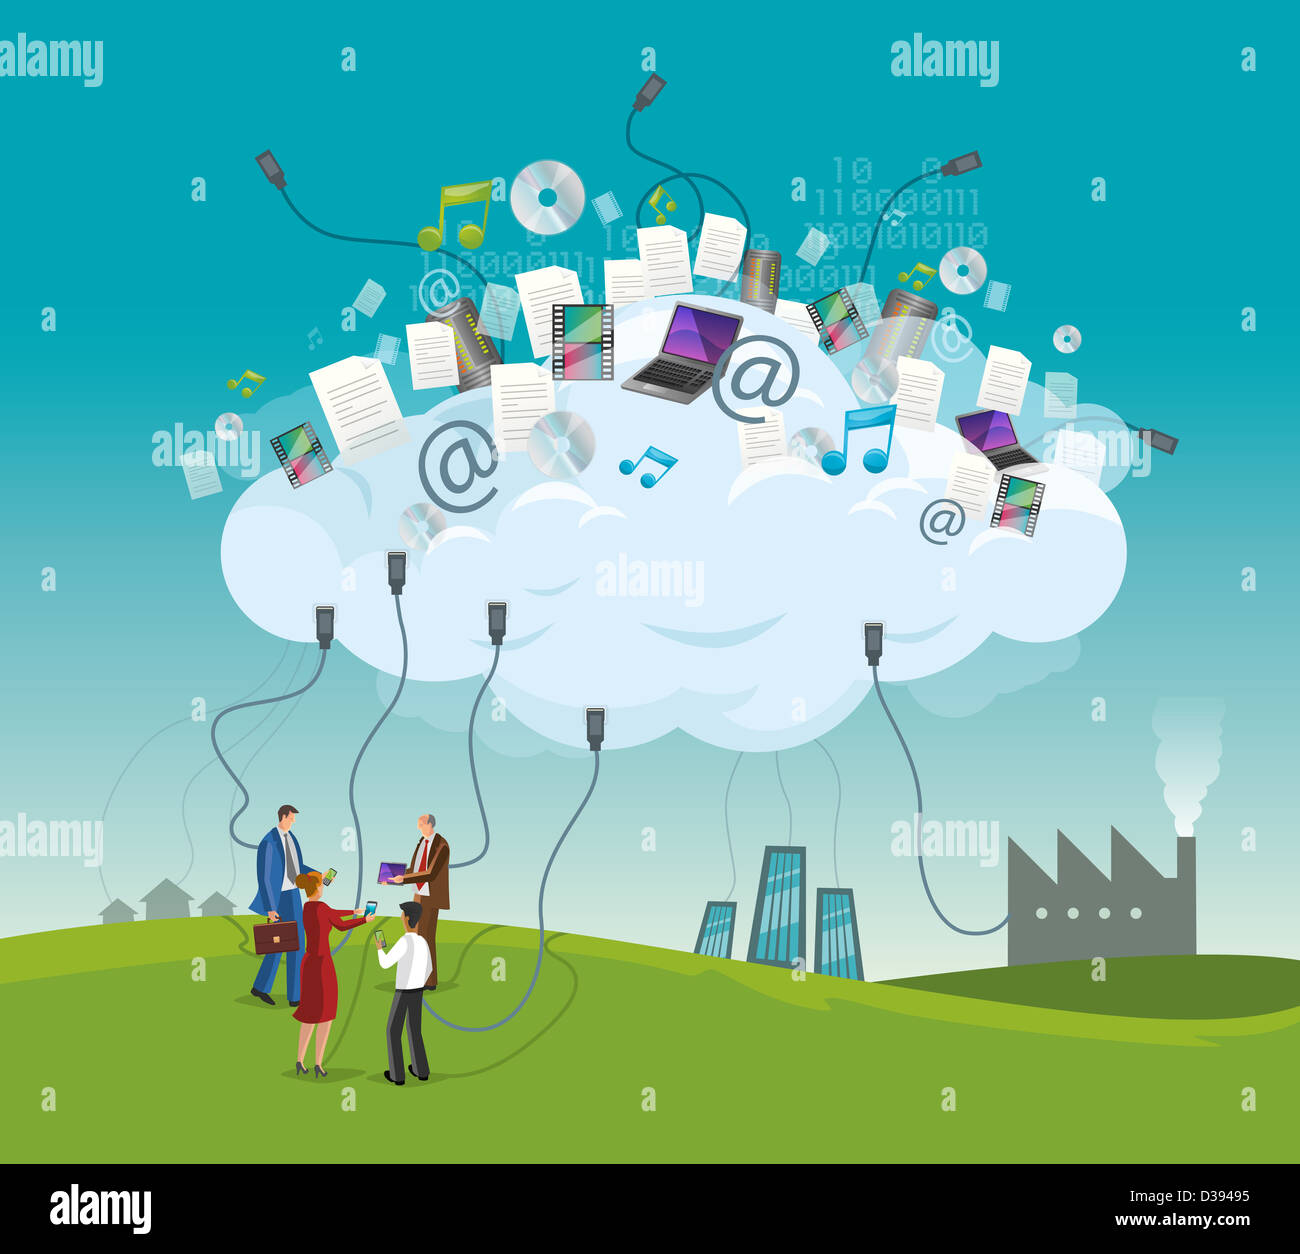 Businesspeople representating concept of cloud computing Stock Photo